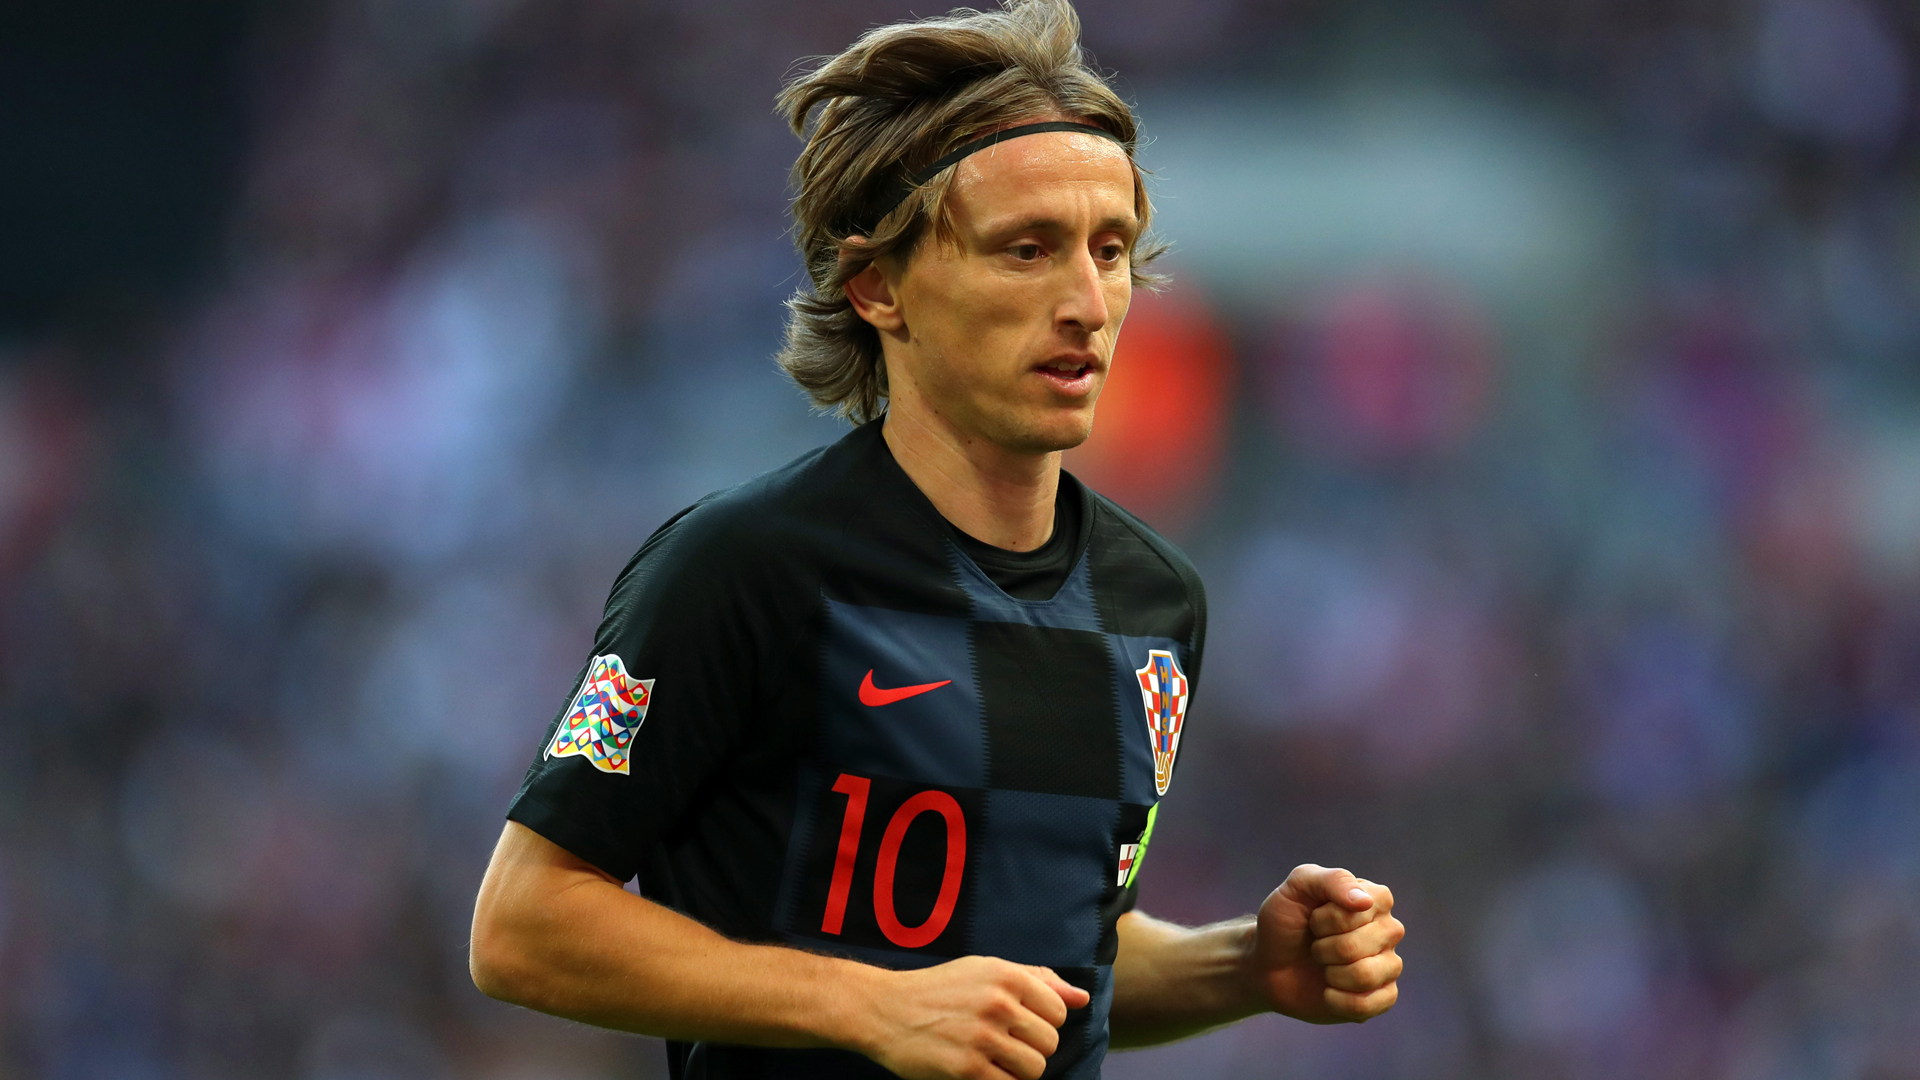 He may be a favourite to win the Ballon d'Or, but Luka Modric insisted it would make no difference.